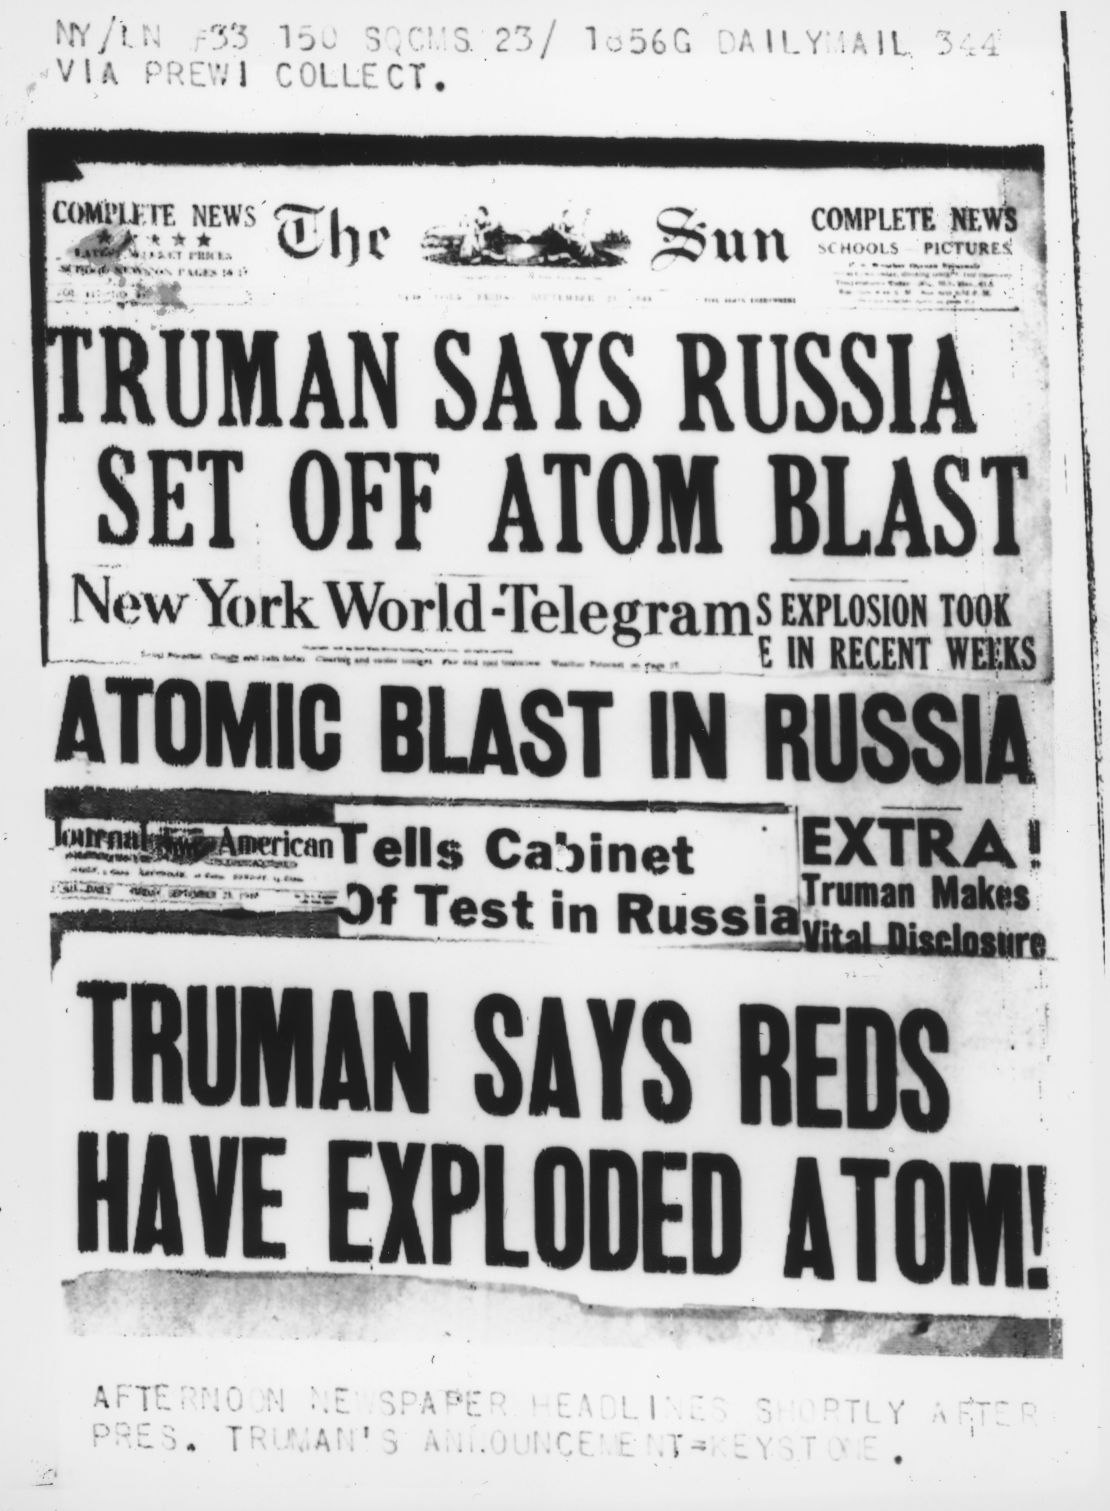 A selection of US newspaper headlines on President Truman's announcement that Soviet Union had conducted its first nuclear weapon test, September 24, 1949.